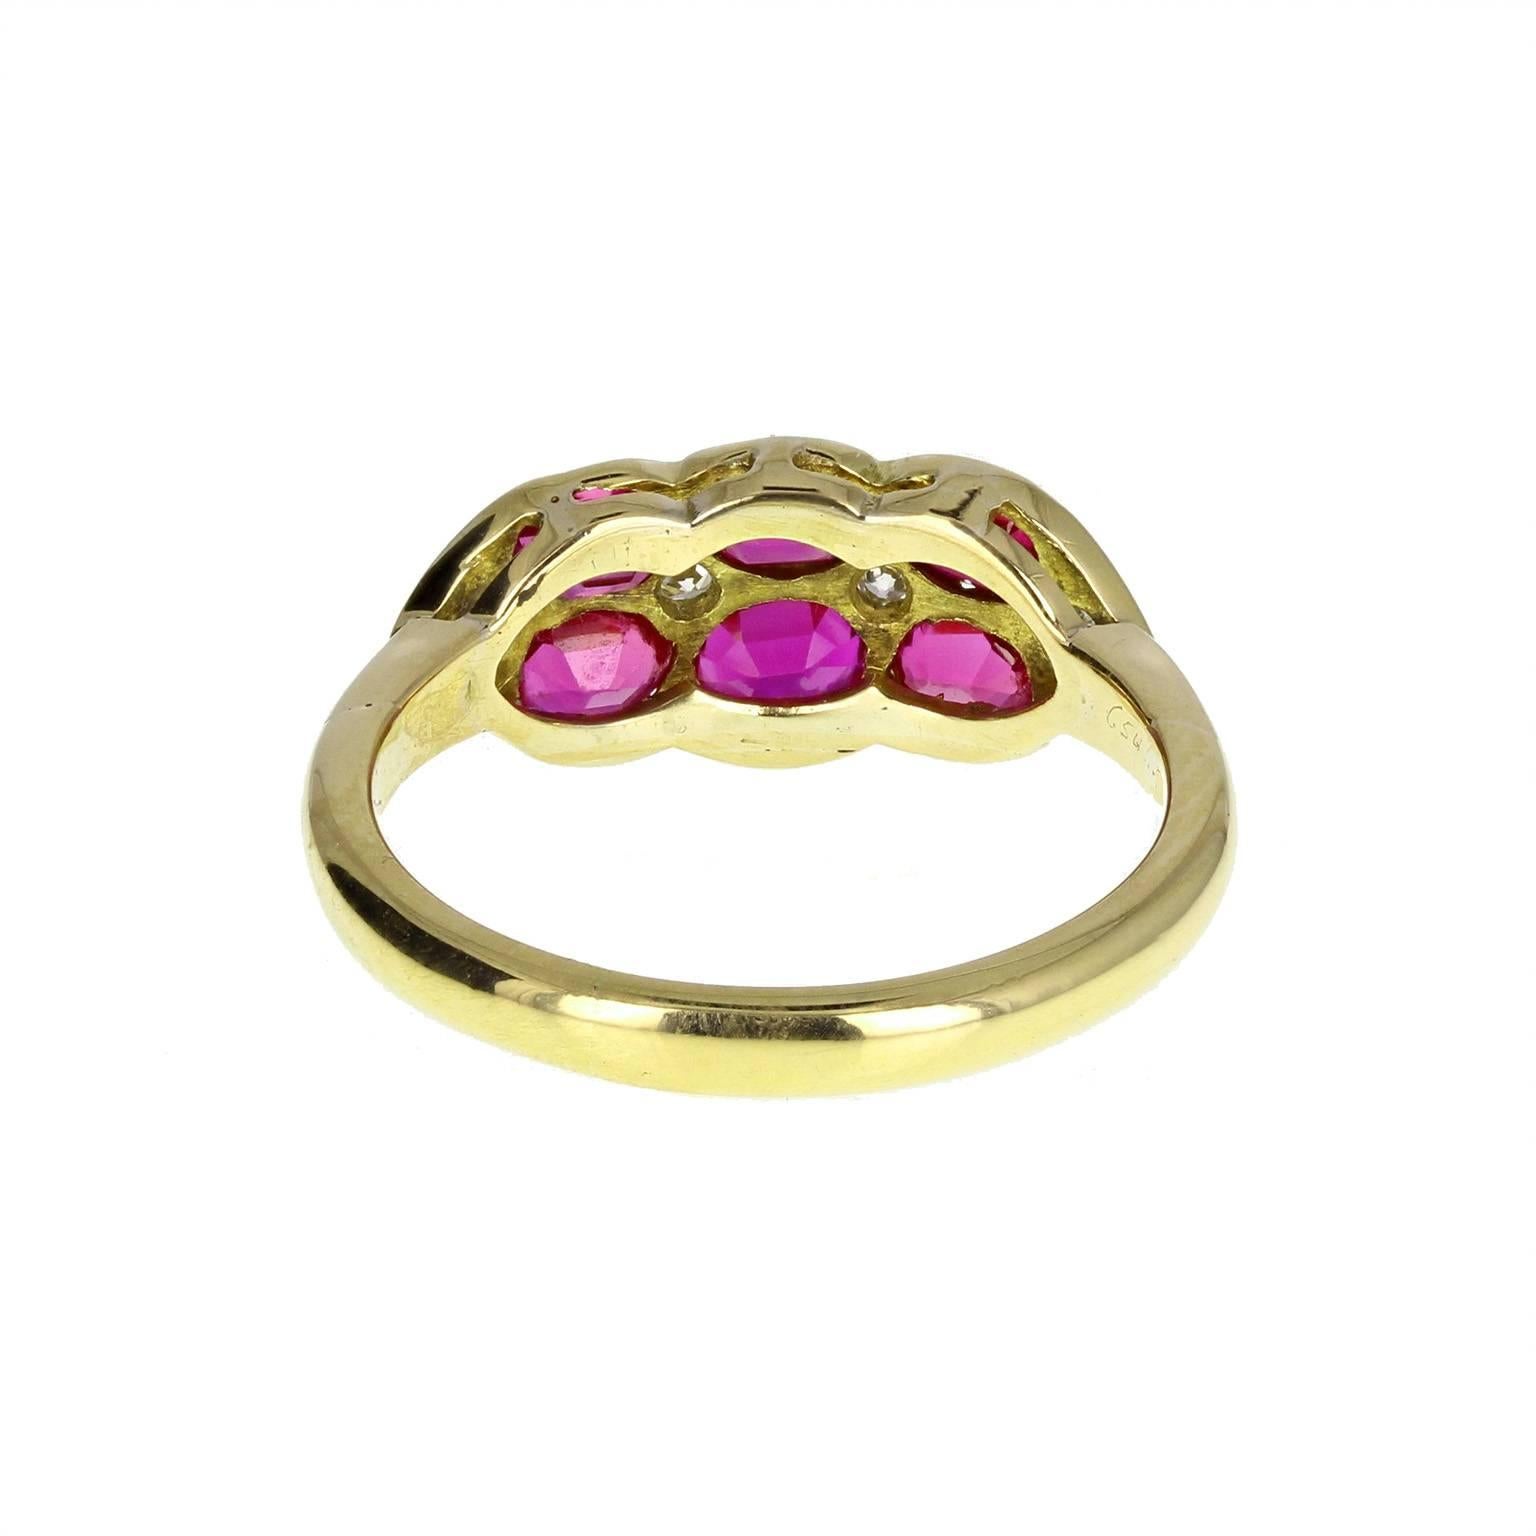 Late Victorian Antique Victorian Ruby Rose Cut Diamond Gold Ring